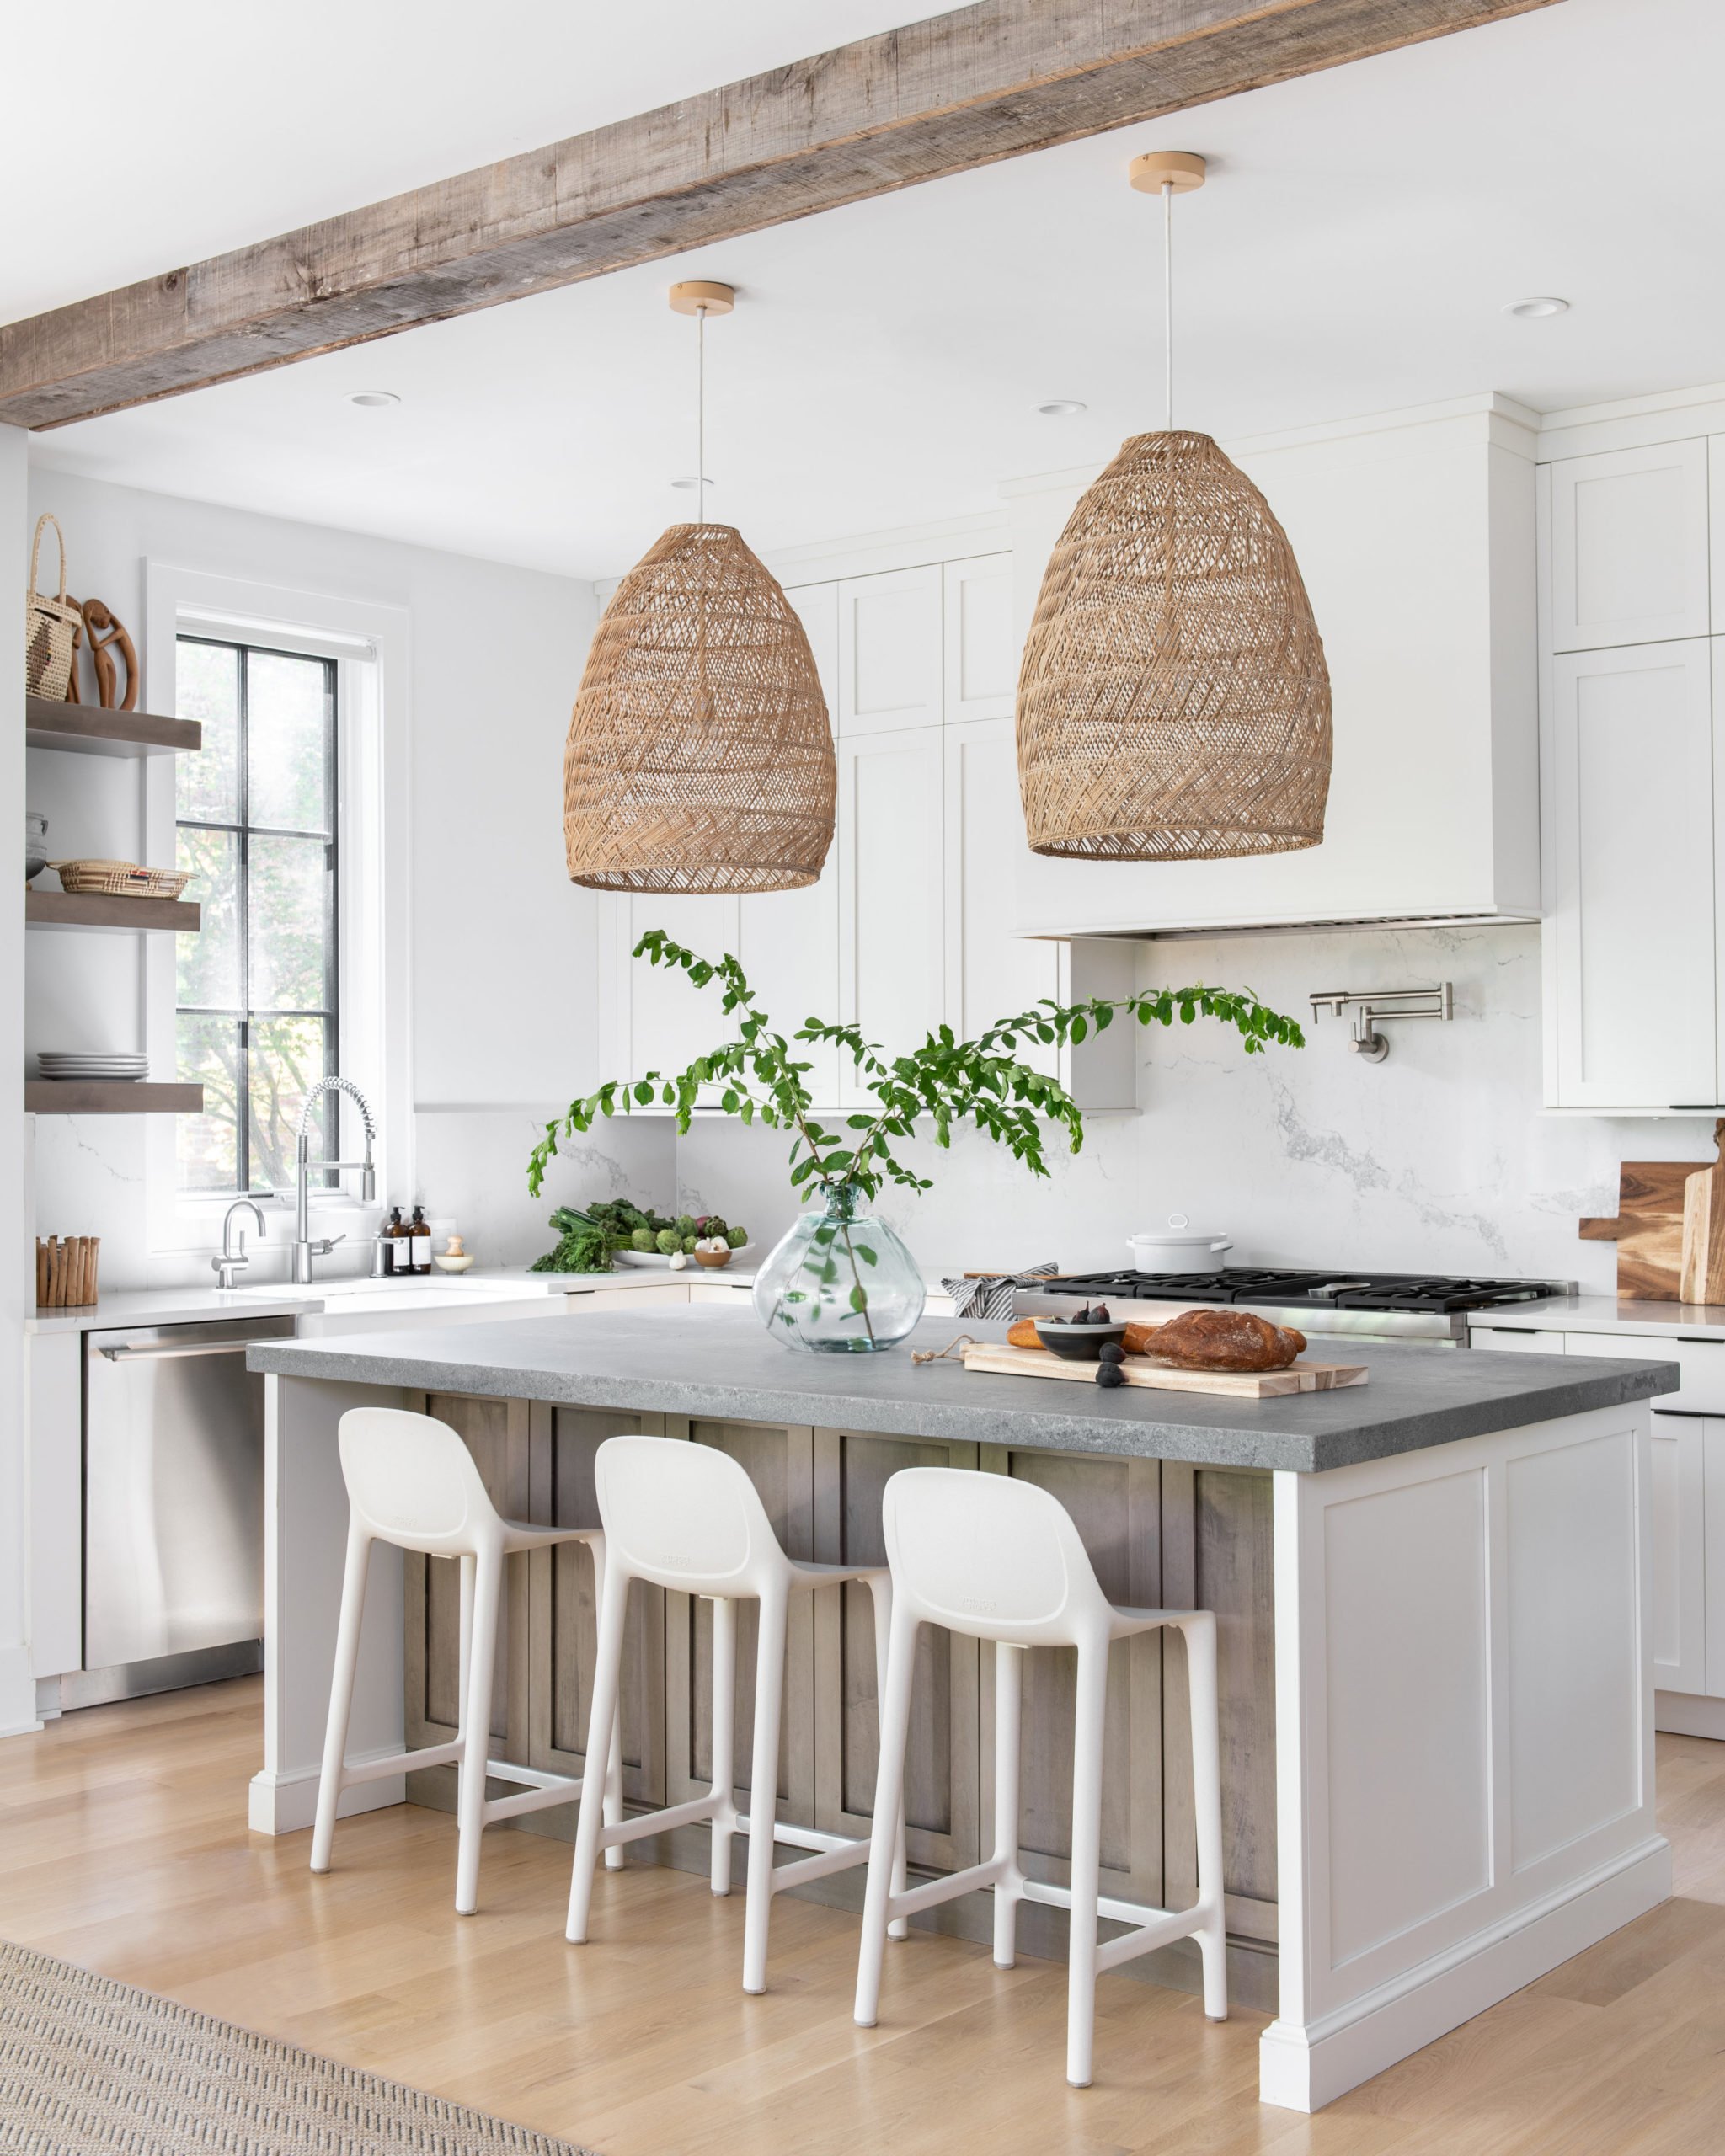 5 white kitchen renovations that redefine the classic trend